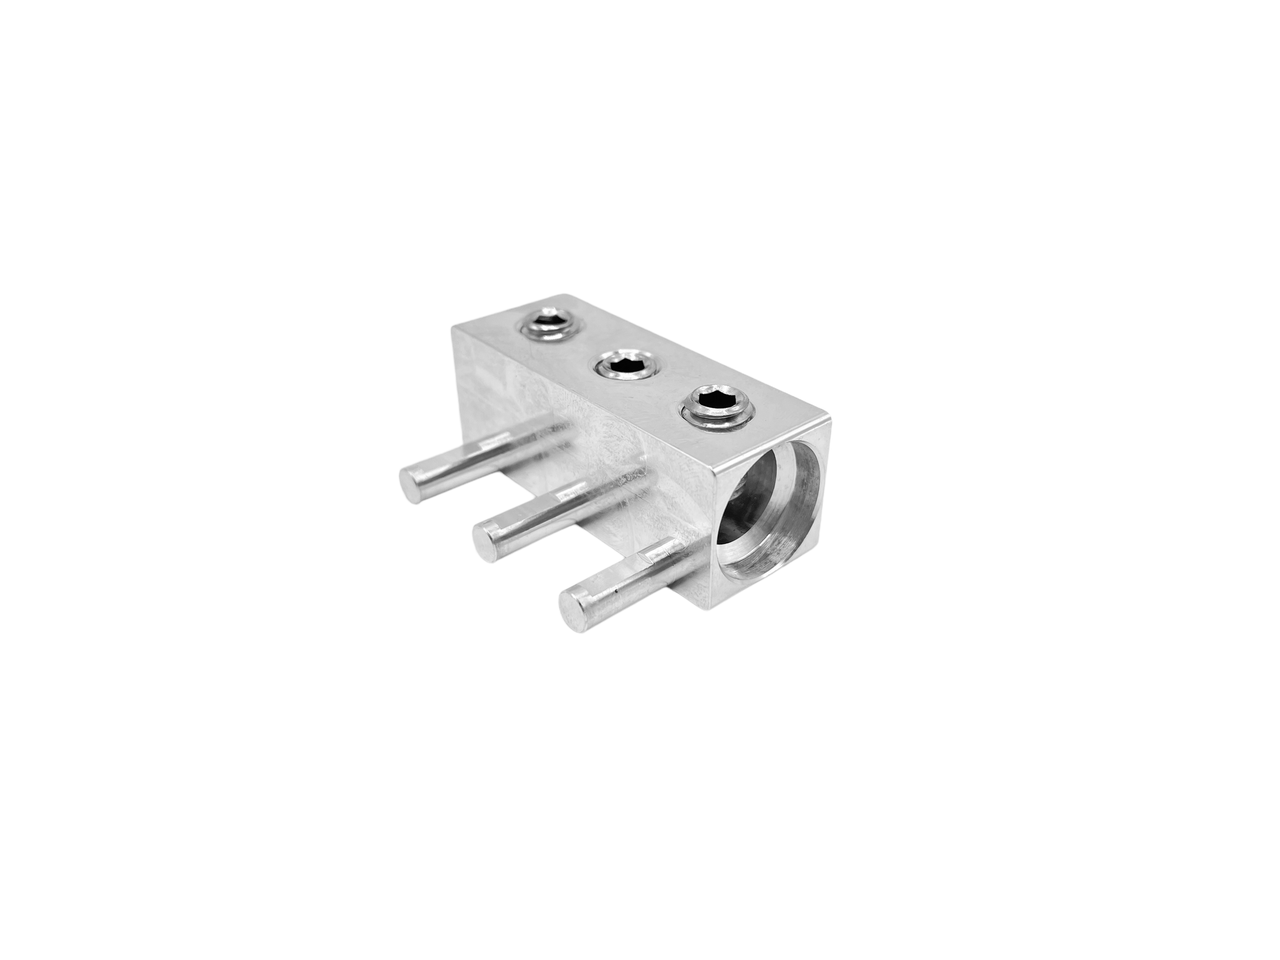 SMD Triple LRC Cable Adapter Block - 3 x 8AWG to 3 x 1/0AWG (1 Adaptor)